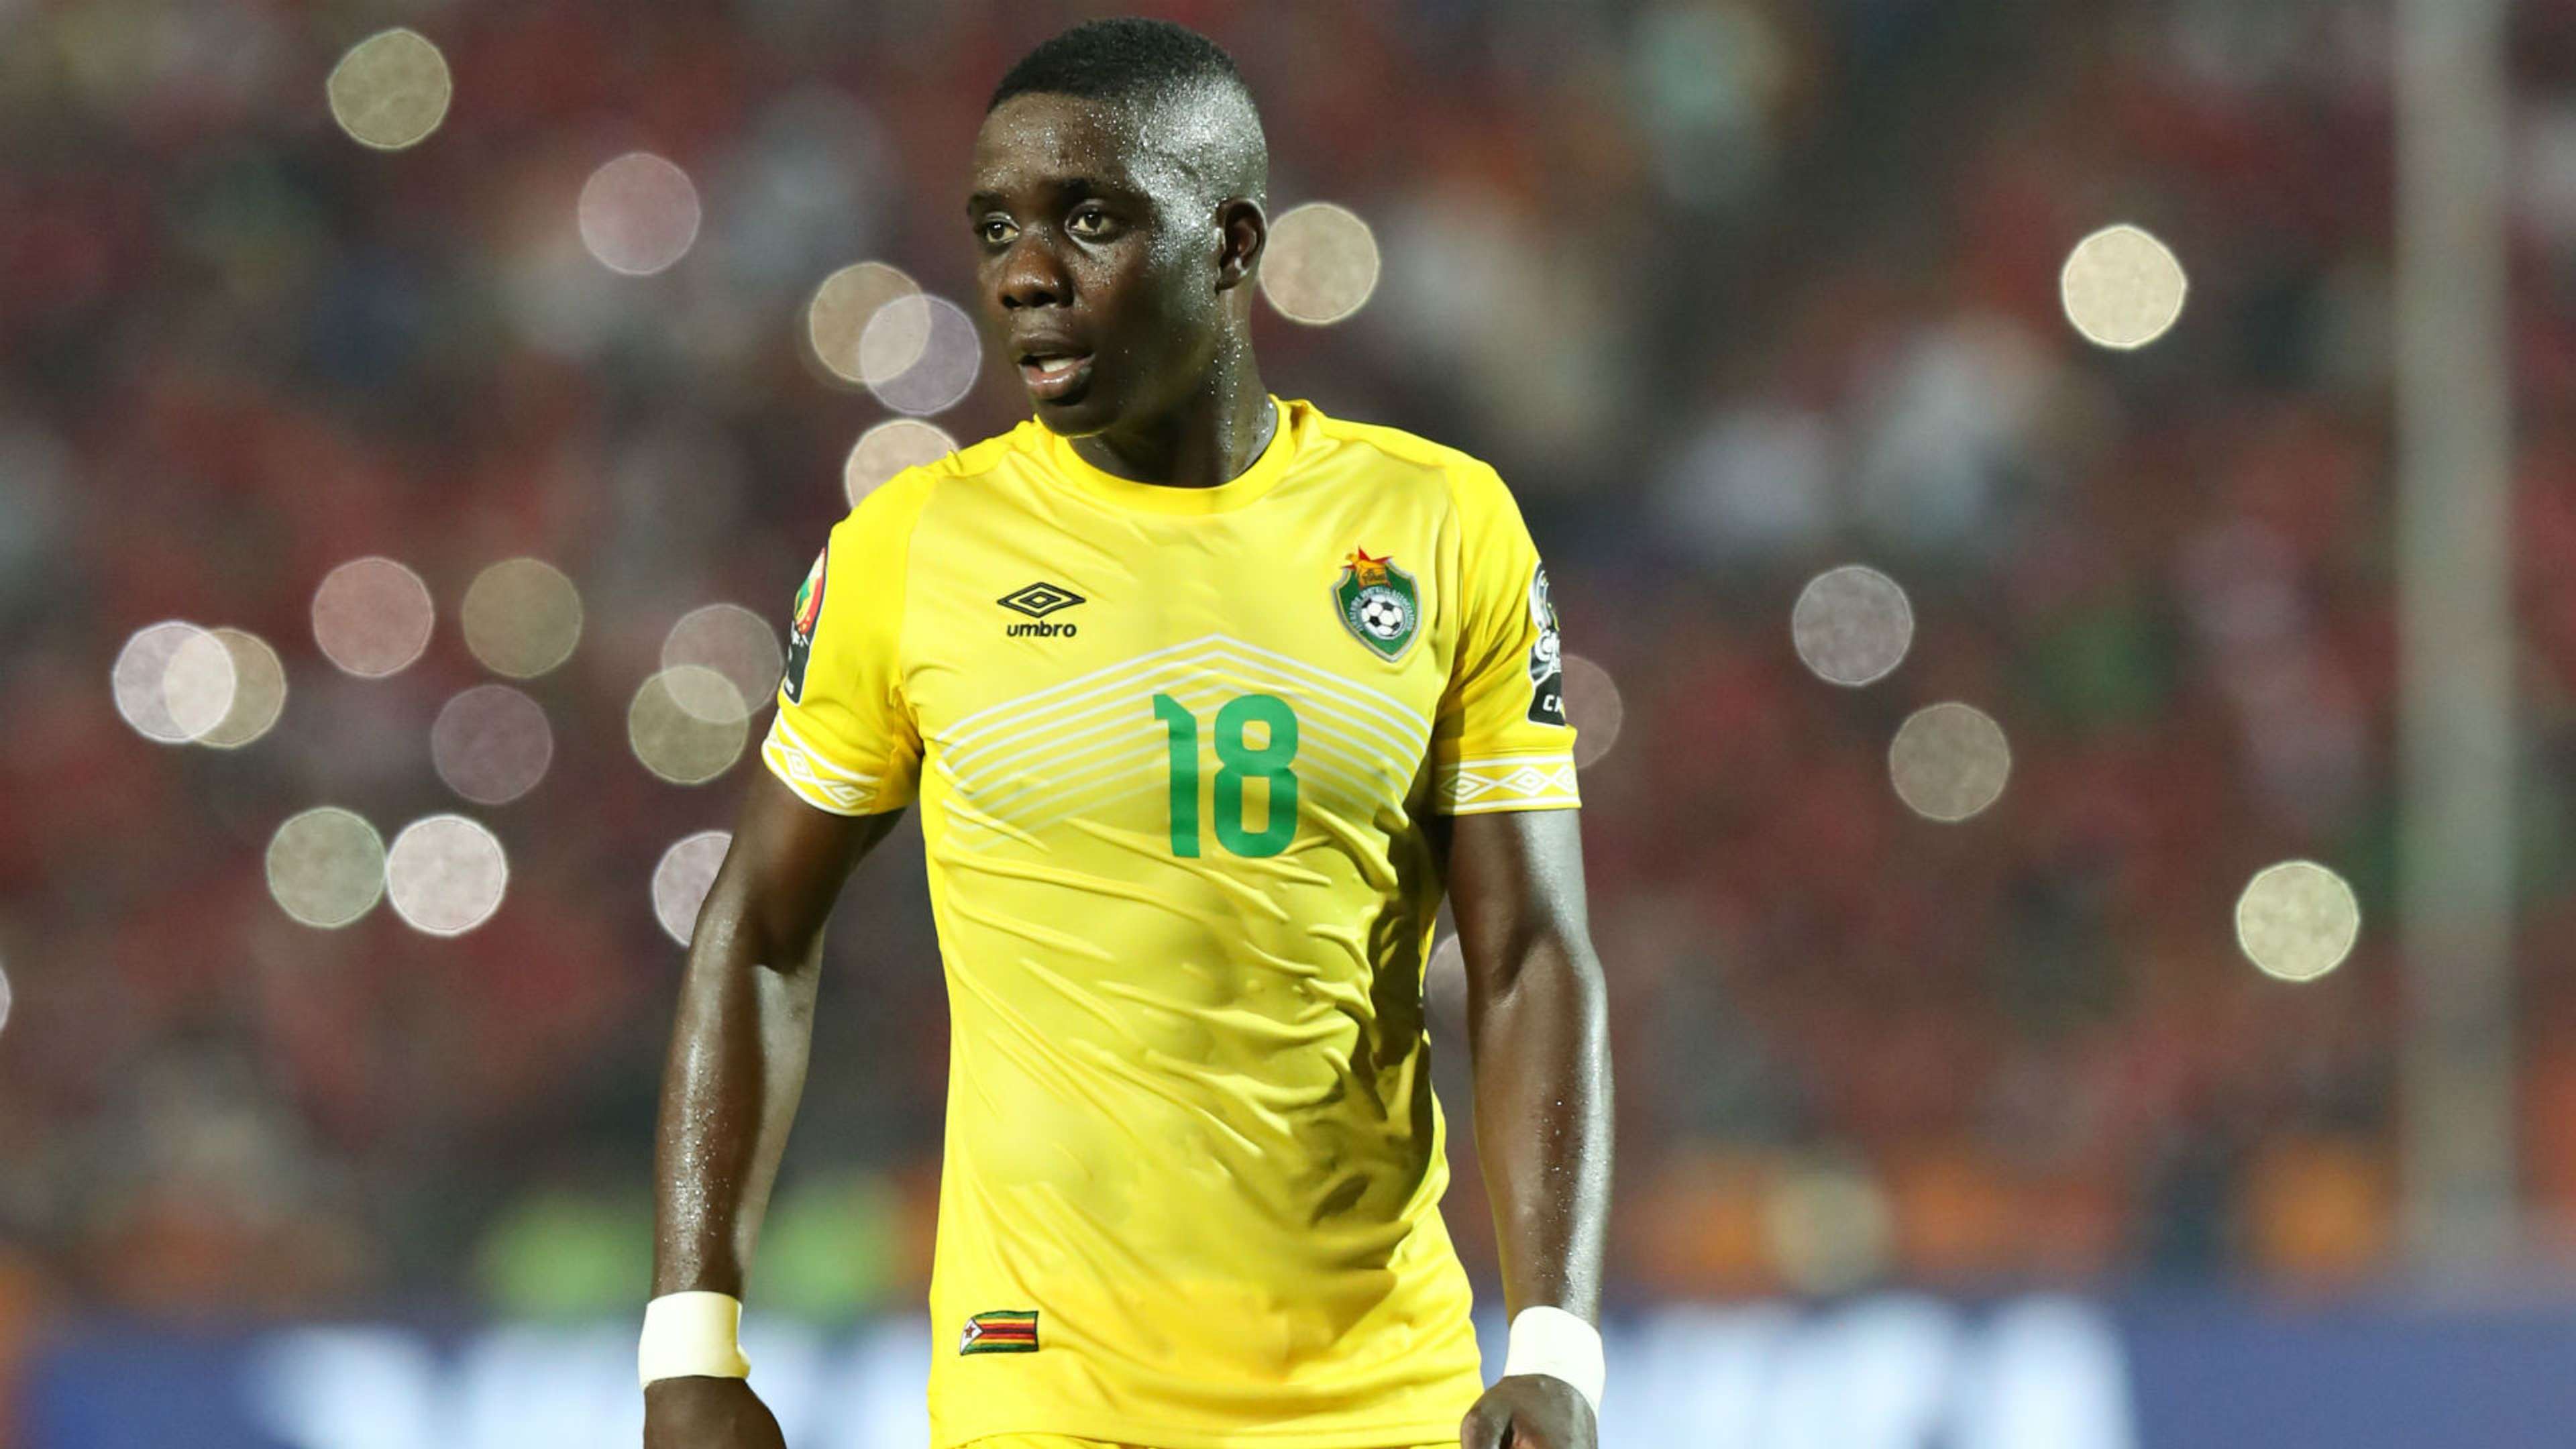 Marvellous Nakamba of Zimbabwe during the 2019 Africa Cup of Nations.